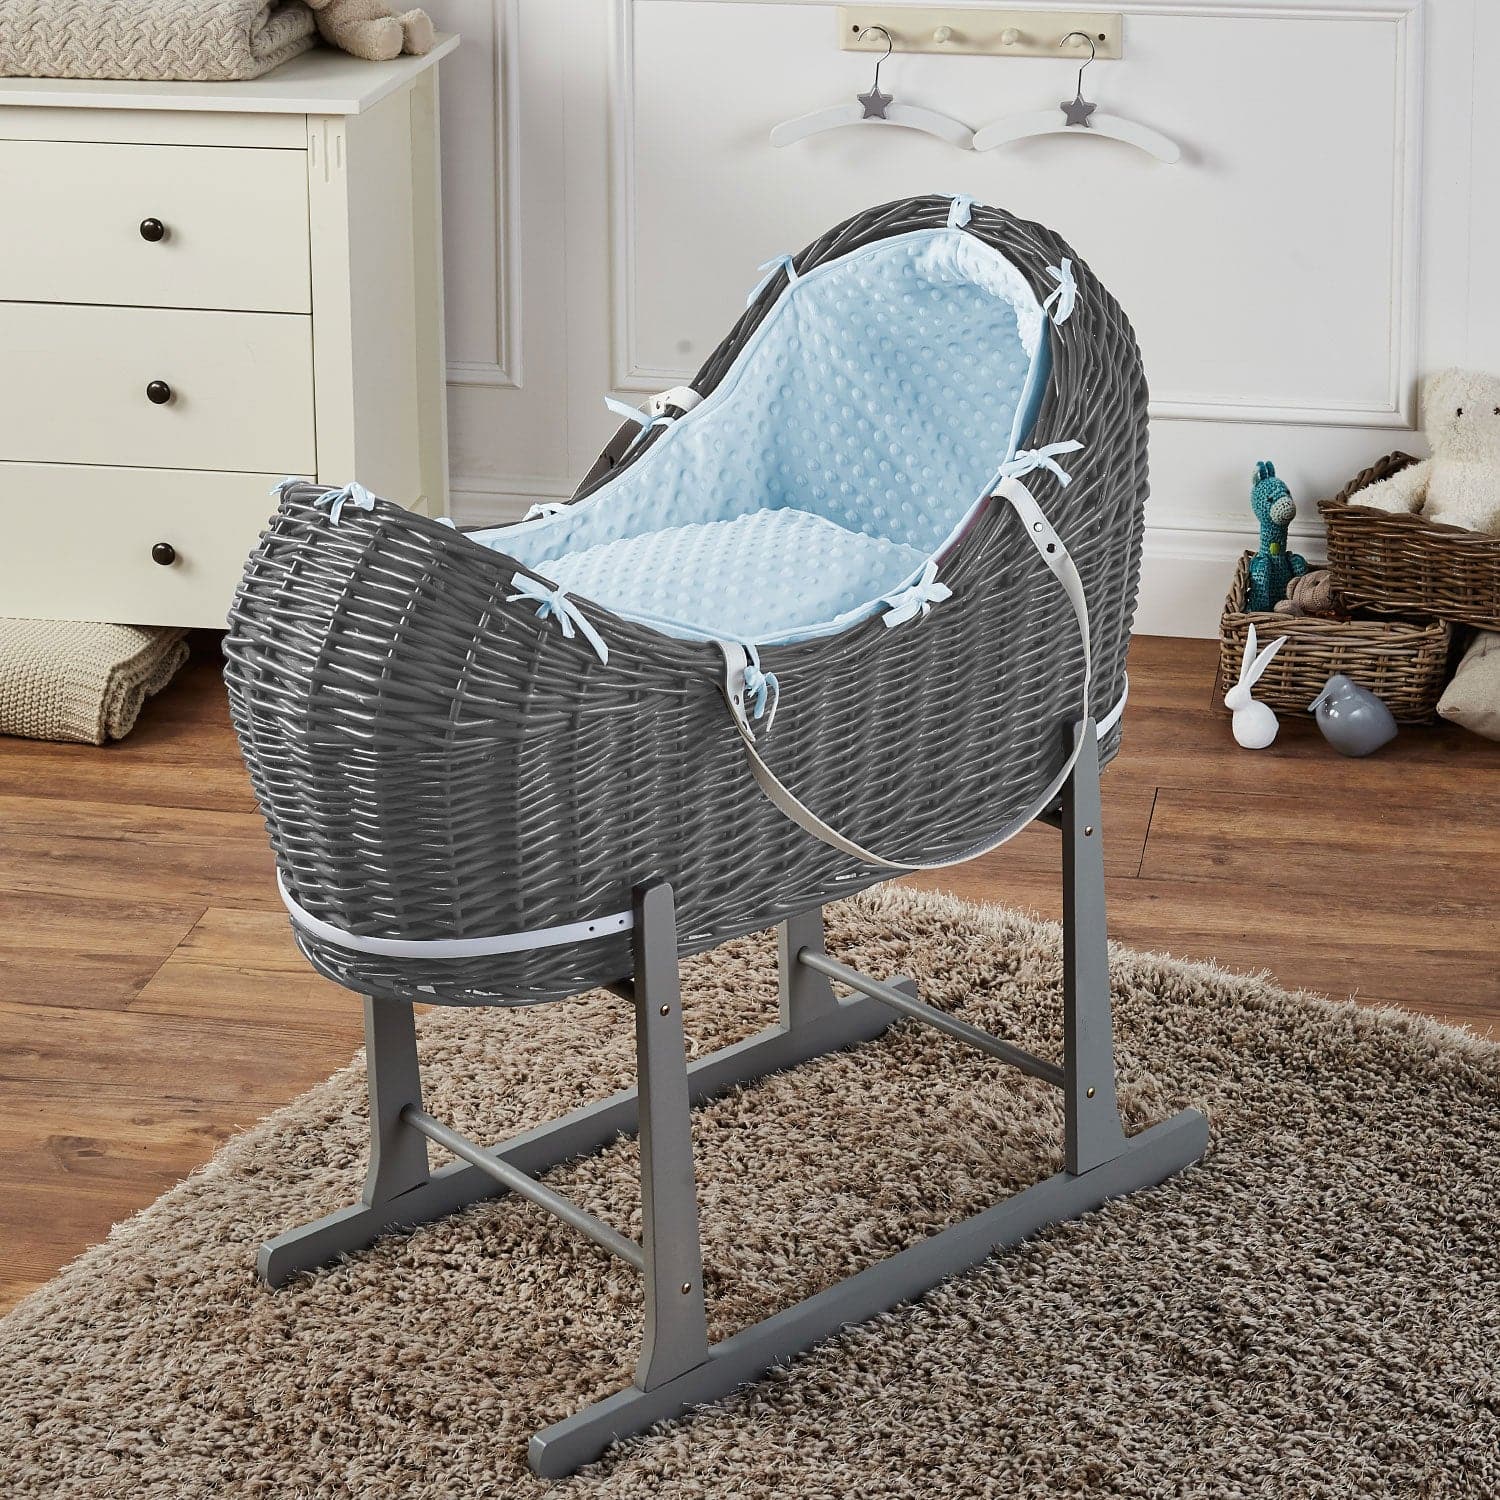 Wicker Deluxe Pod Baby Moses Basket With Stand - Grey / Dimple / Blue | For Your Little One